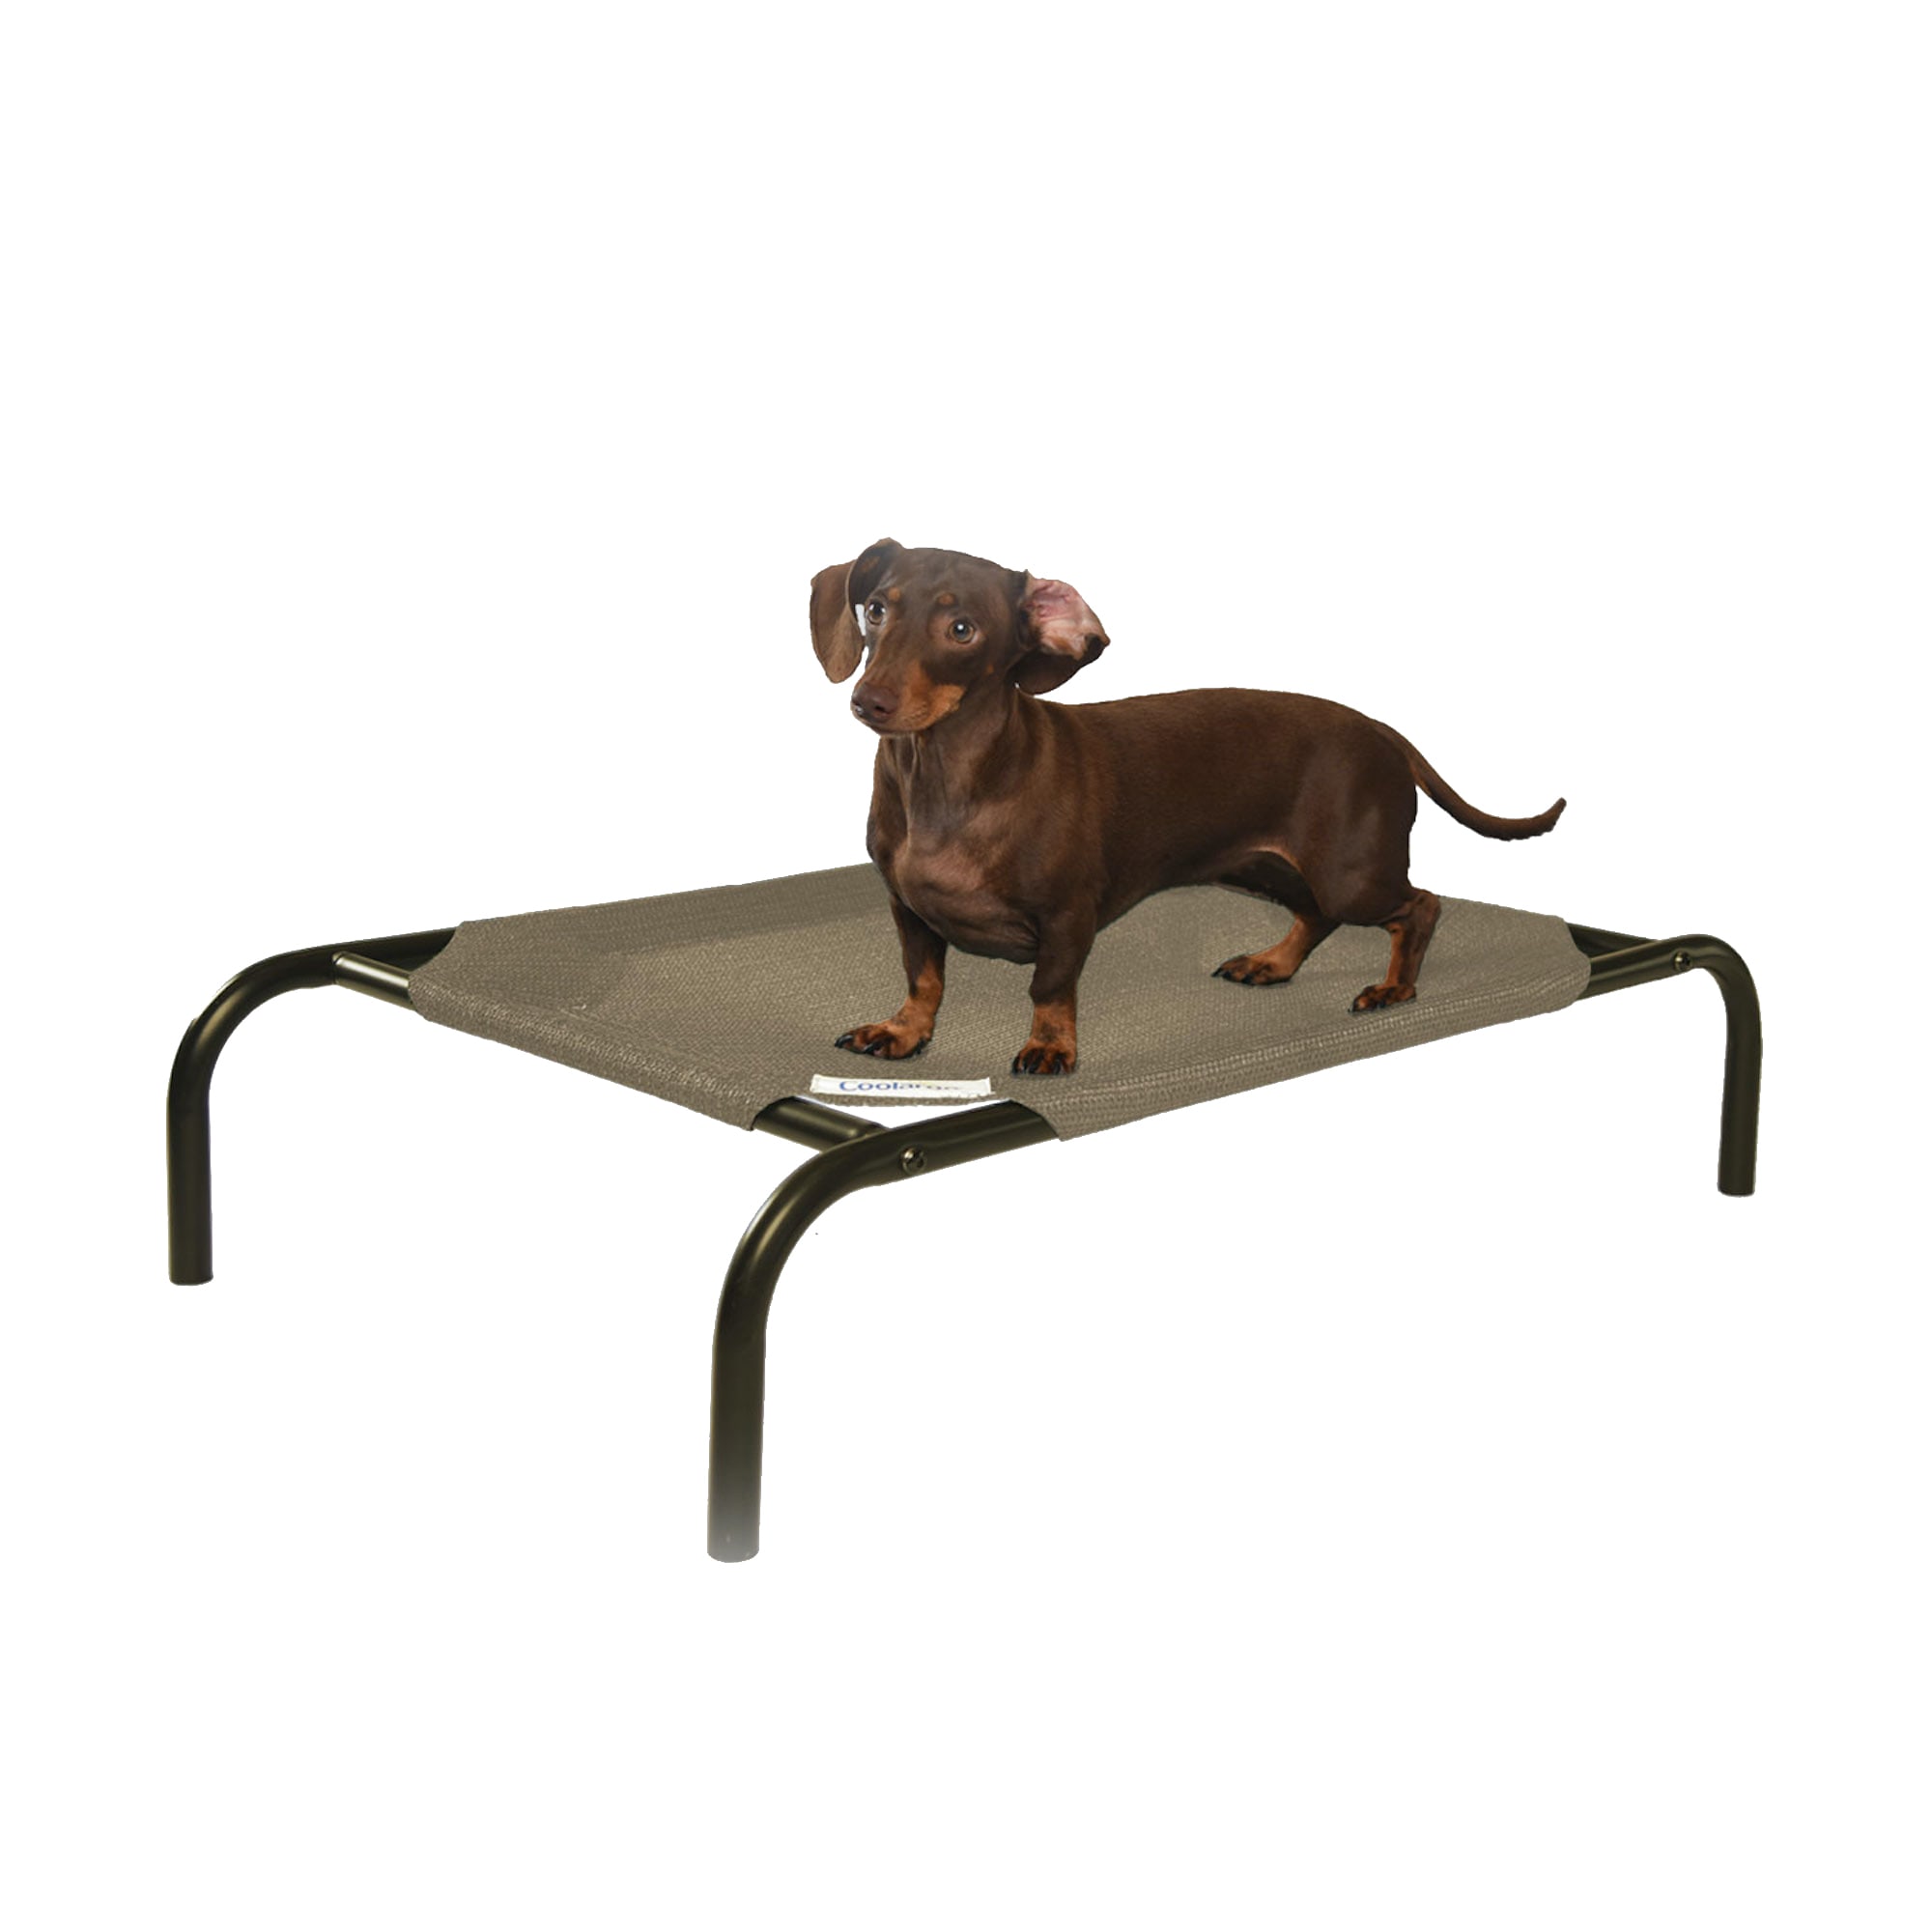 Coolaroo Nutmeg Elevated Dog Bed 34 75, Why Are Beds Elevated Off The Ground